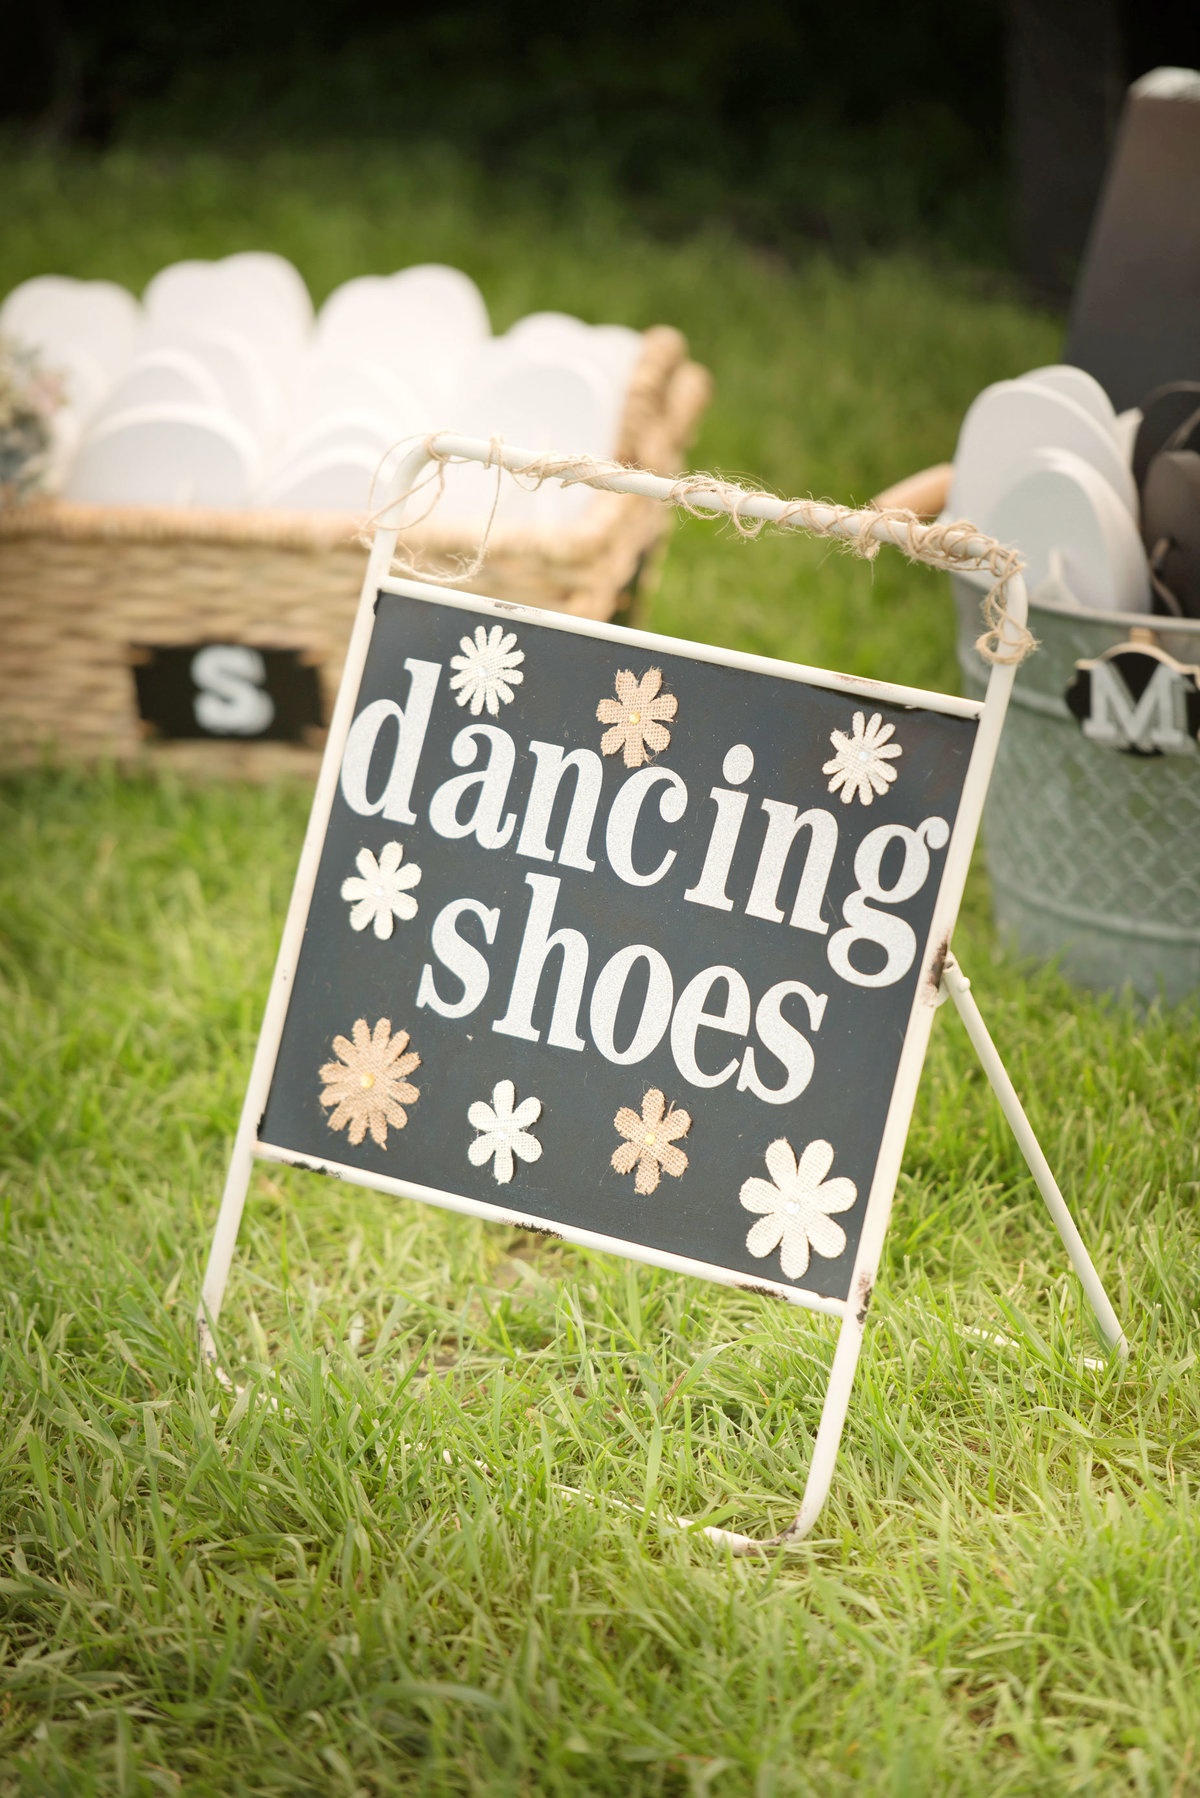 Dancing shoes sign at a tented wedding